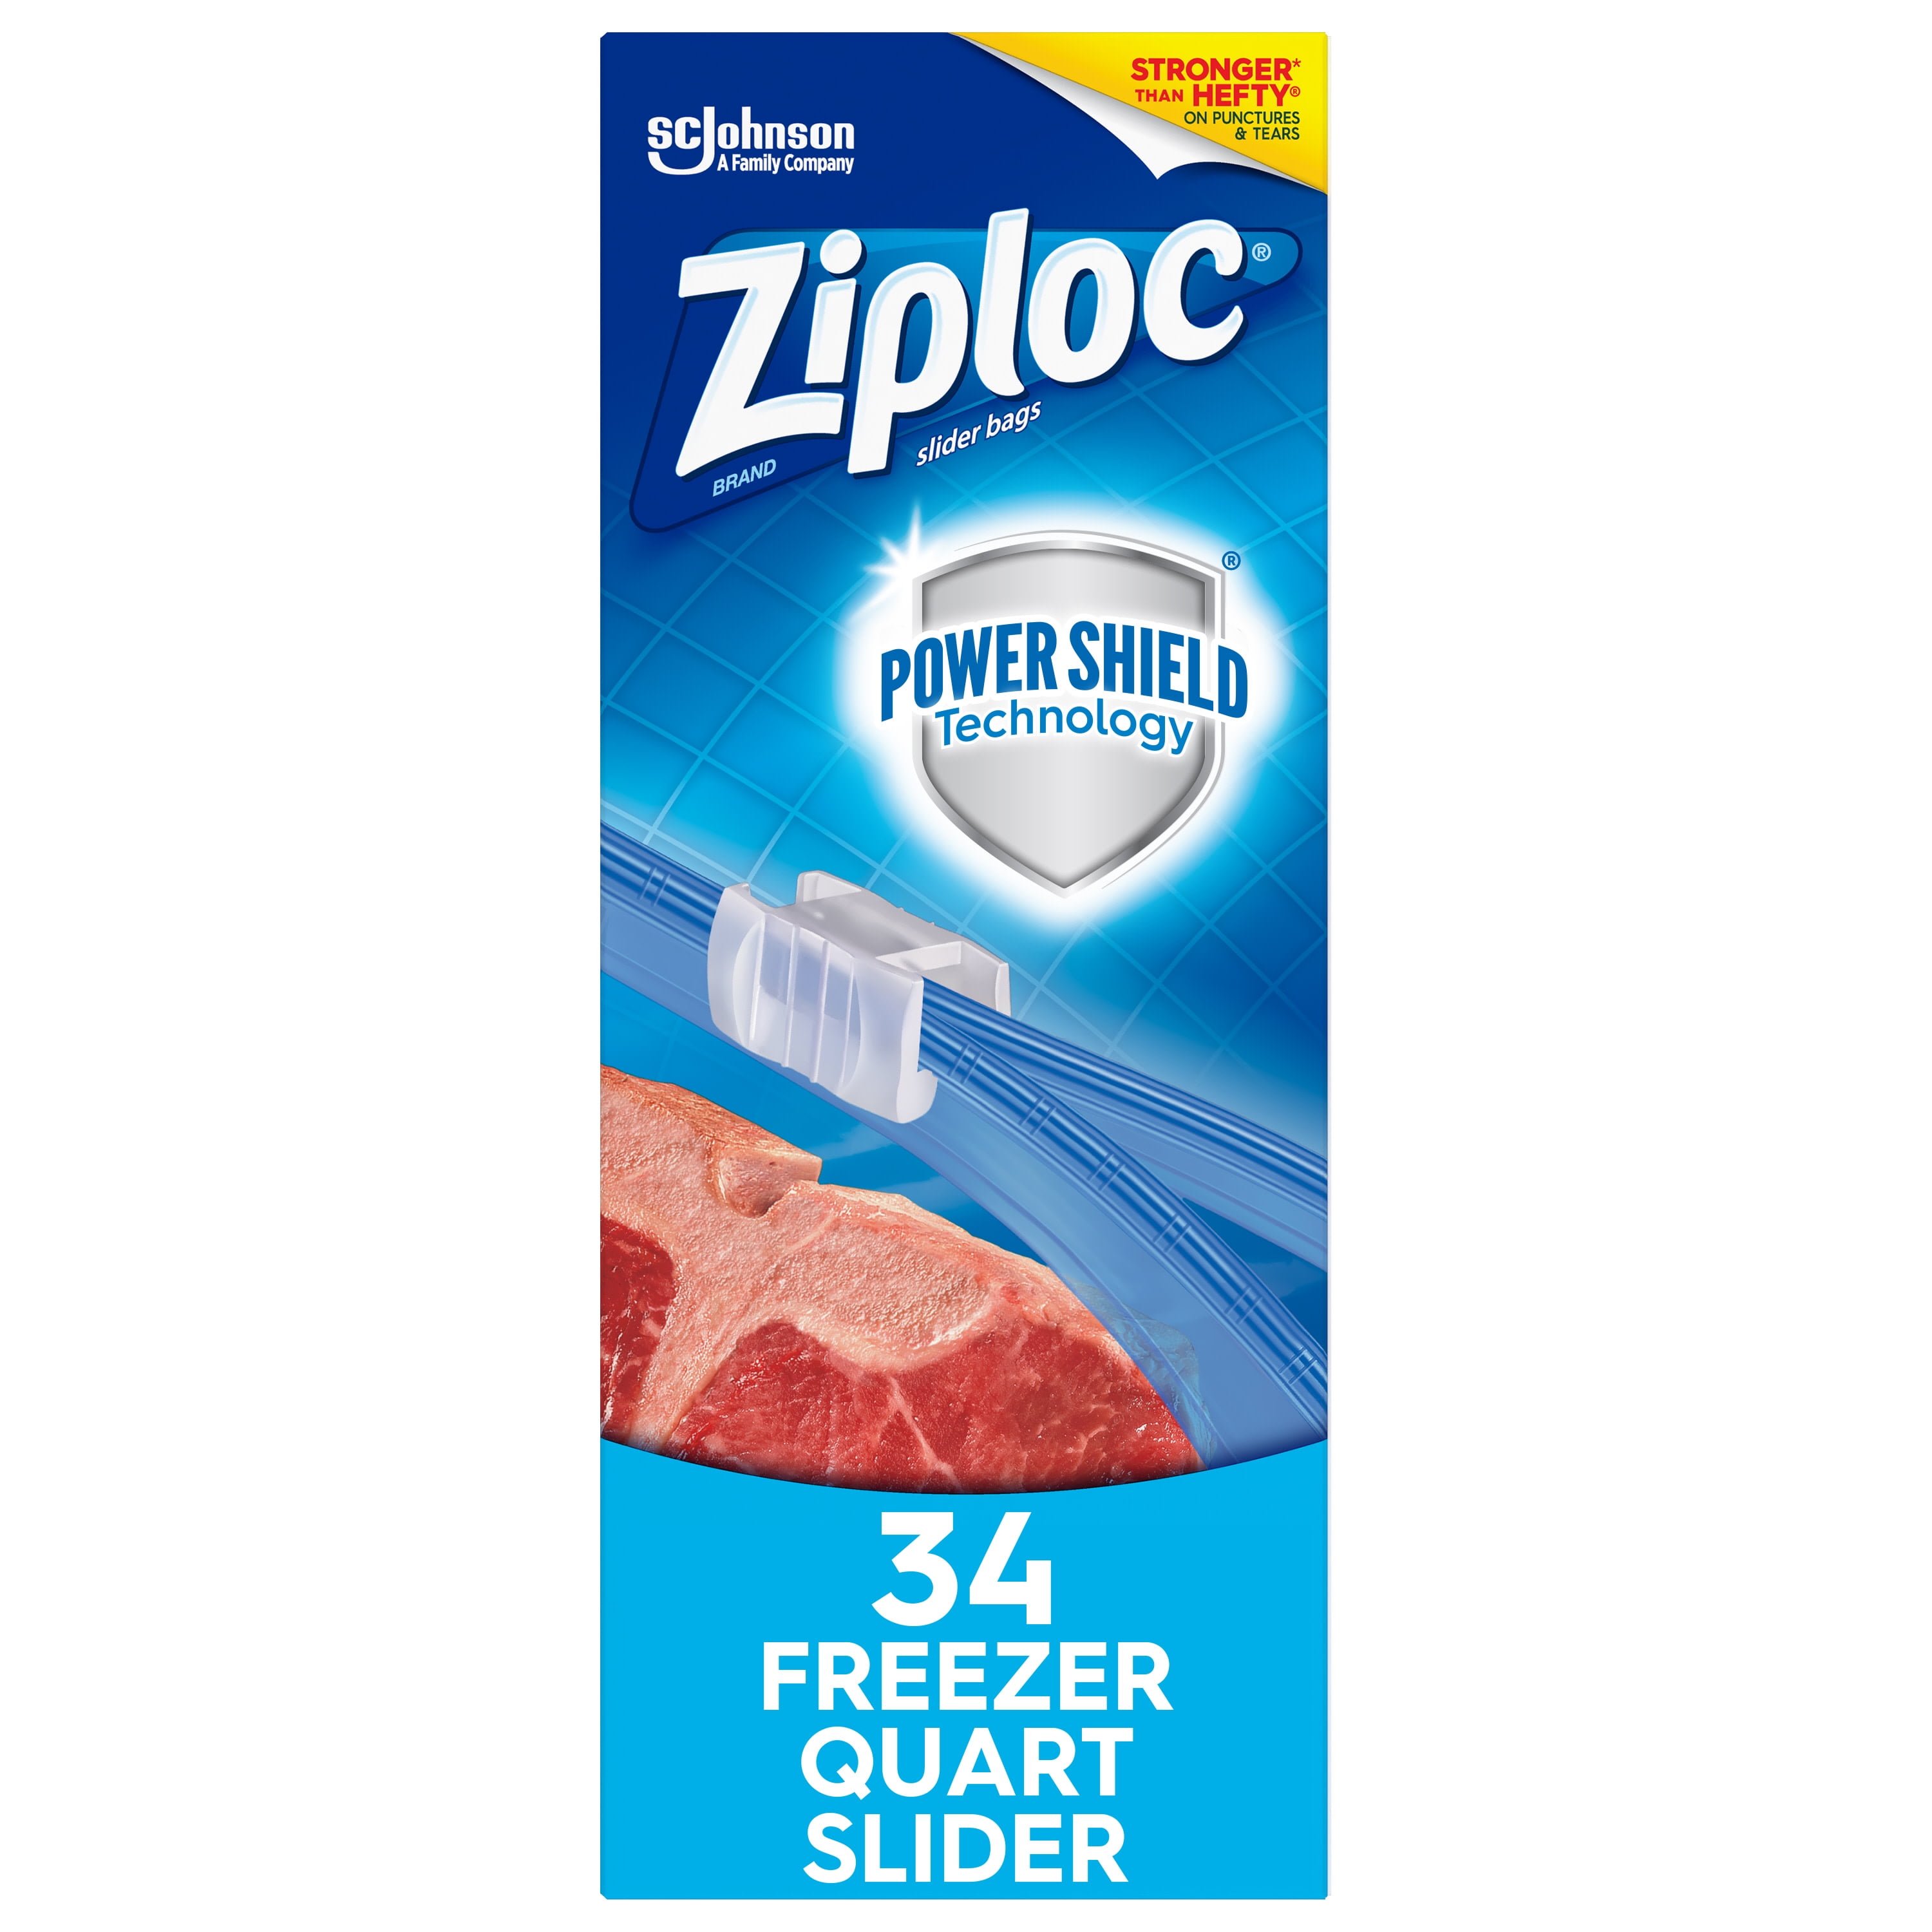 Ziploc Slider Freezer Bags with New Power Shield Technology, Quart, 34  Count, Pack of 4 (136 Total Bags)